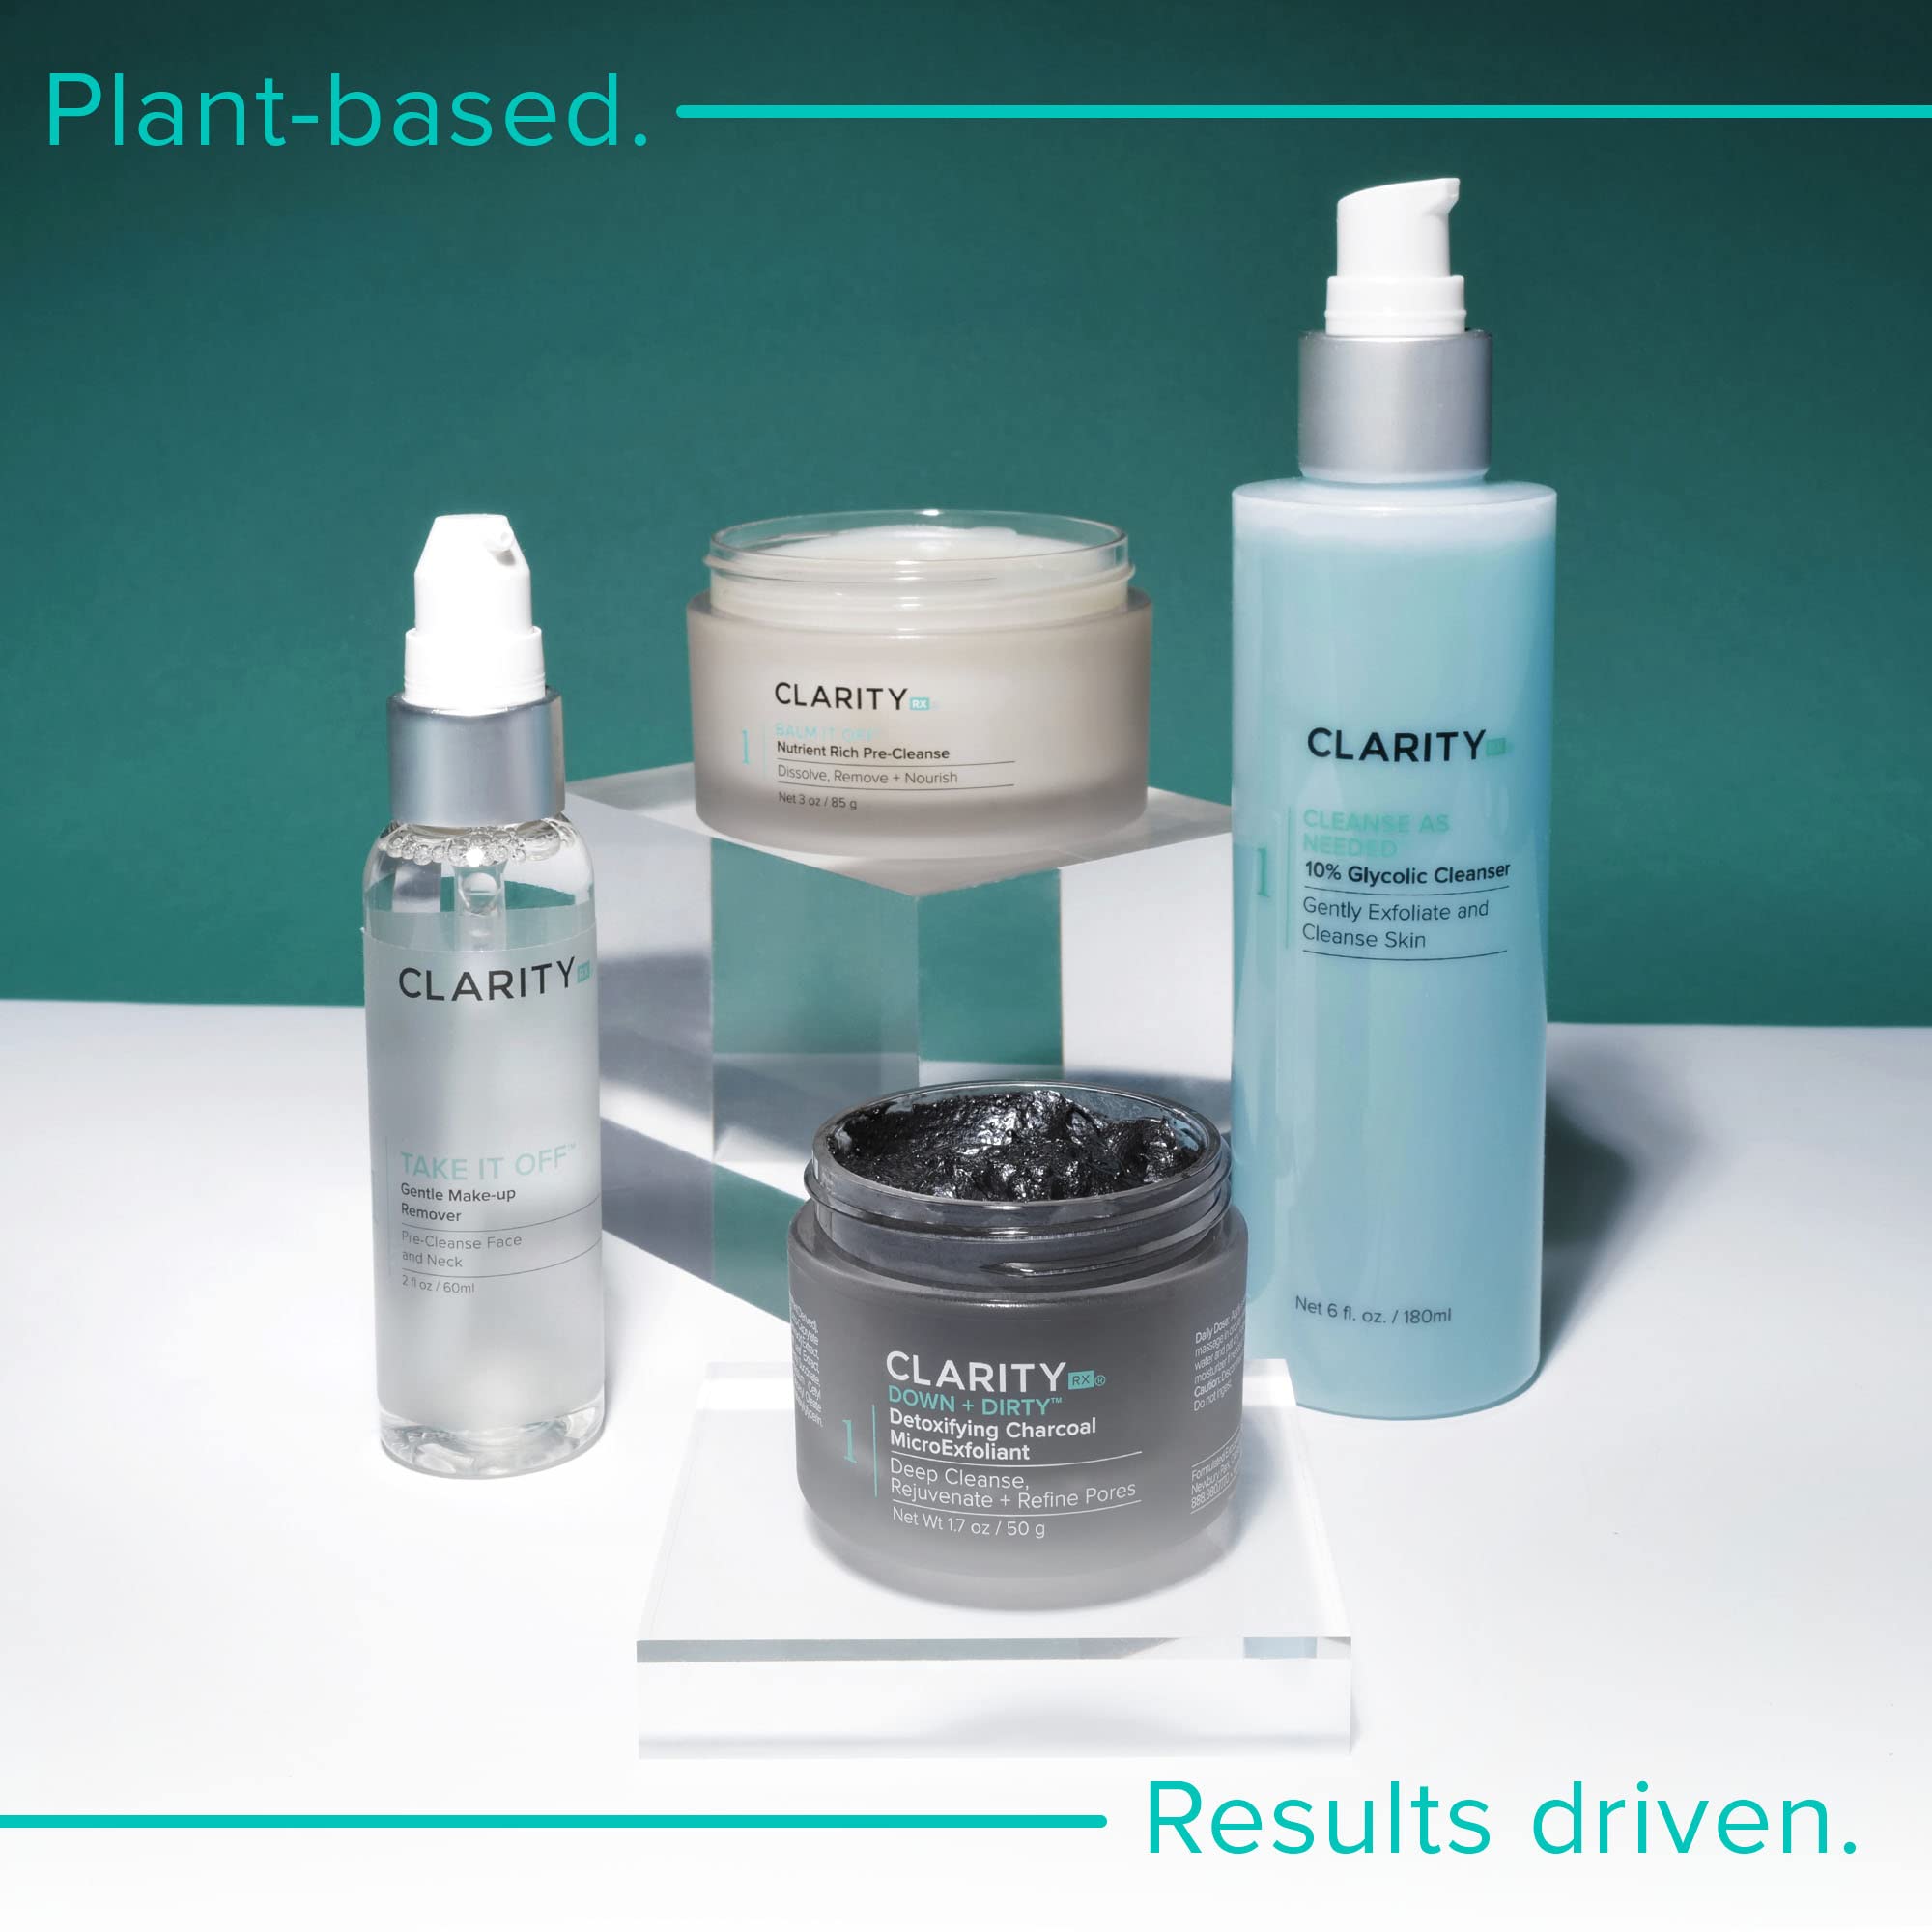 ClarityRx Skincare Essentials Kit | Cleanse, Renew & Protect | Plant-Based, Paraben Free, Natural